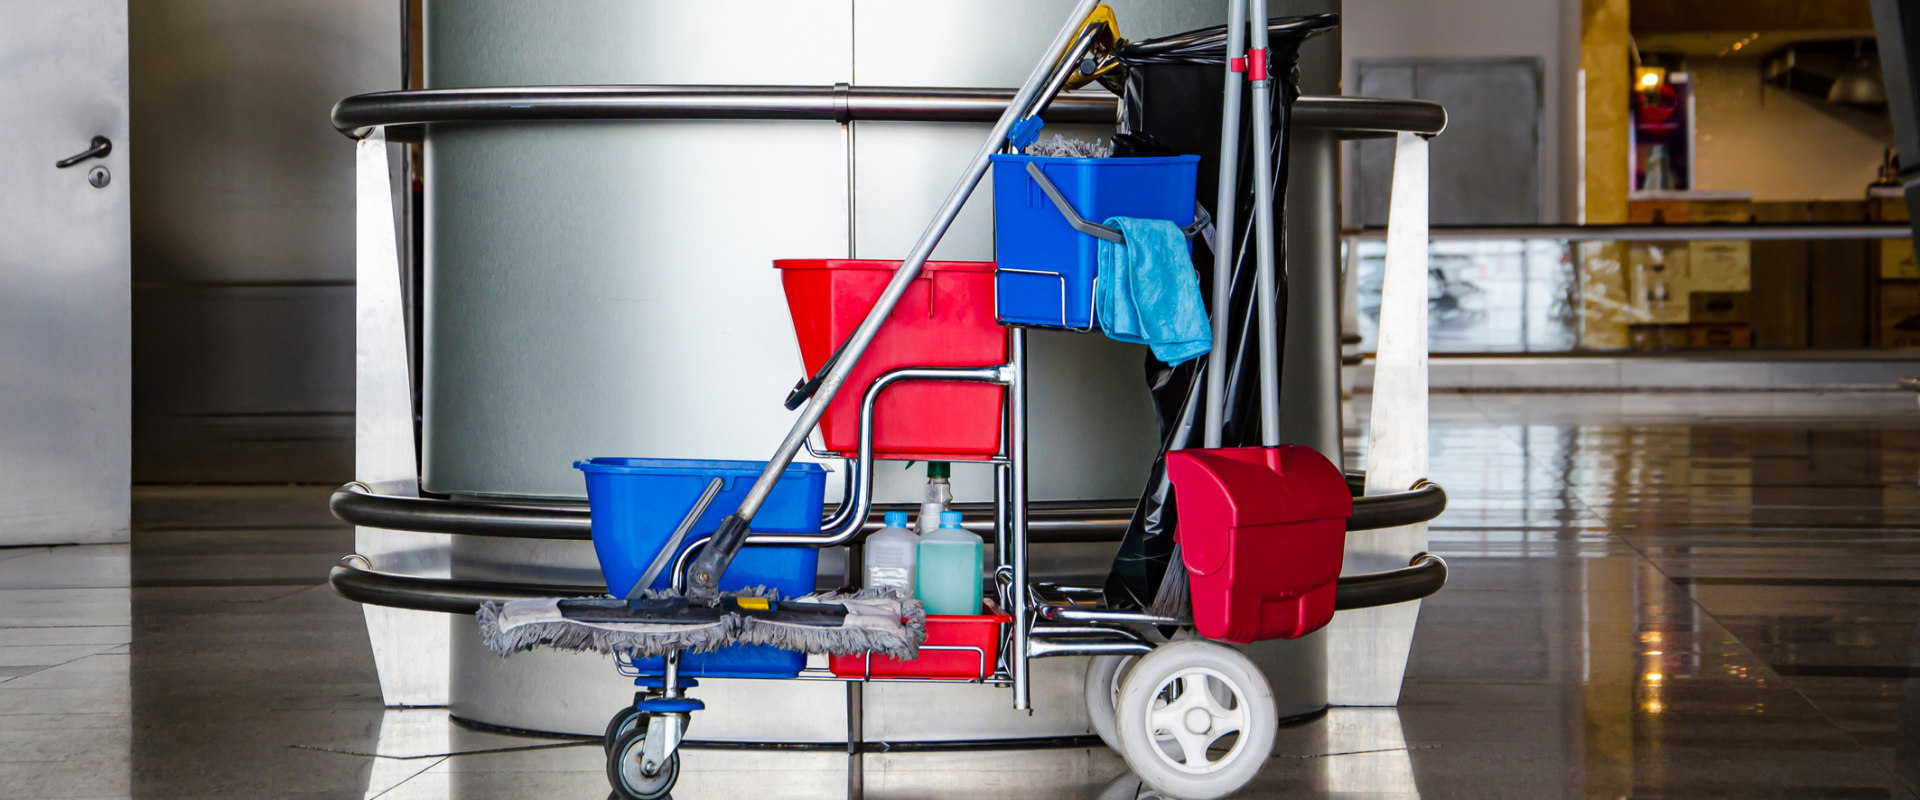 Do Cleaning Businesses in Austin, Texas Offer a Satisfaction Guarantee Policy?